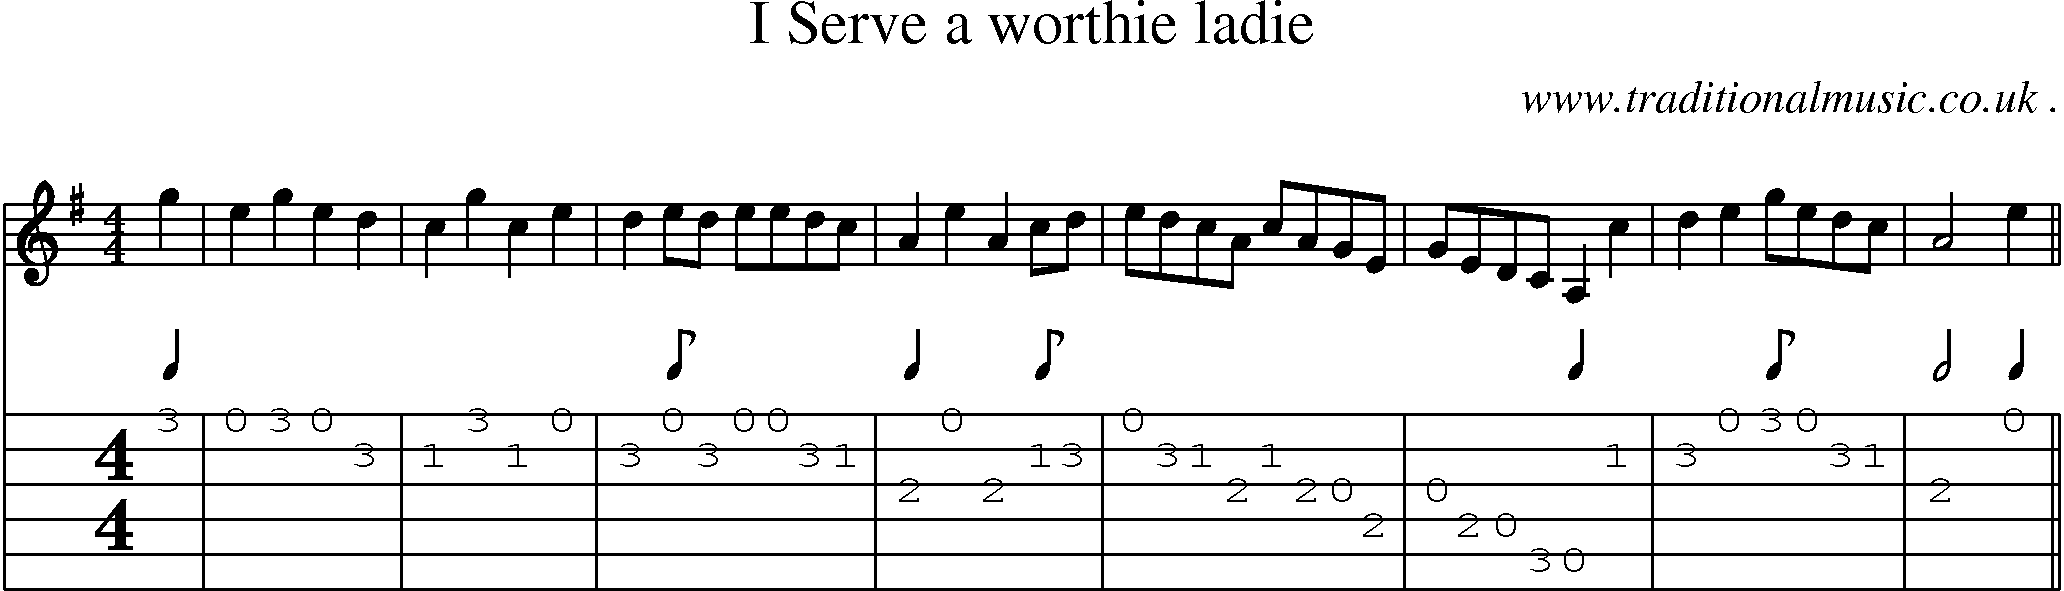 Sheet-Music and Guitar Tabs for I Serve A Worthie Ladie